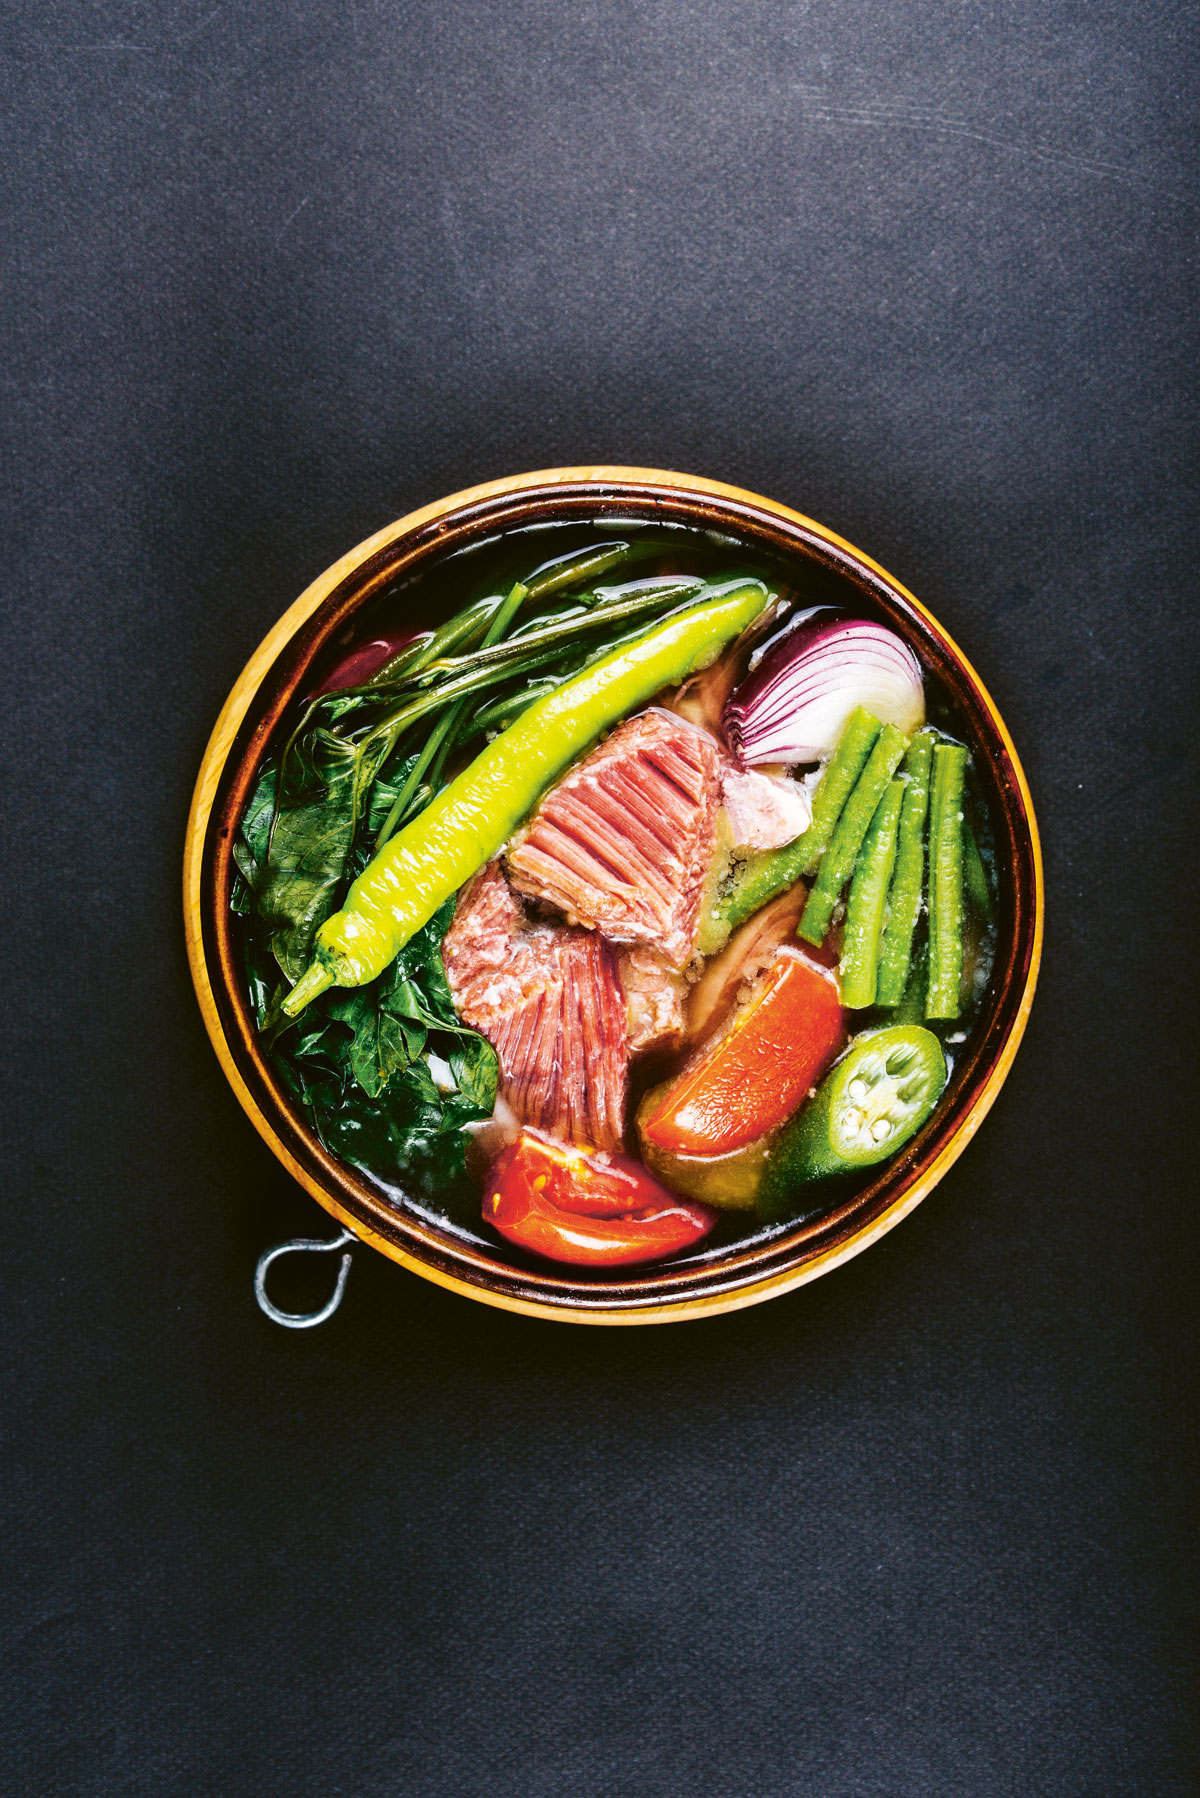 One of Filipino cuisine's signature dishes is the sour and versatile sinigang